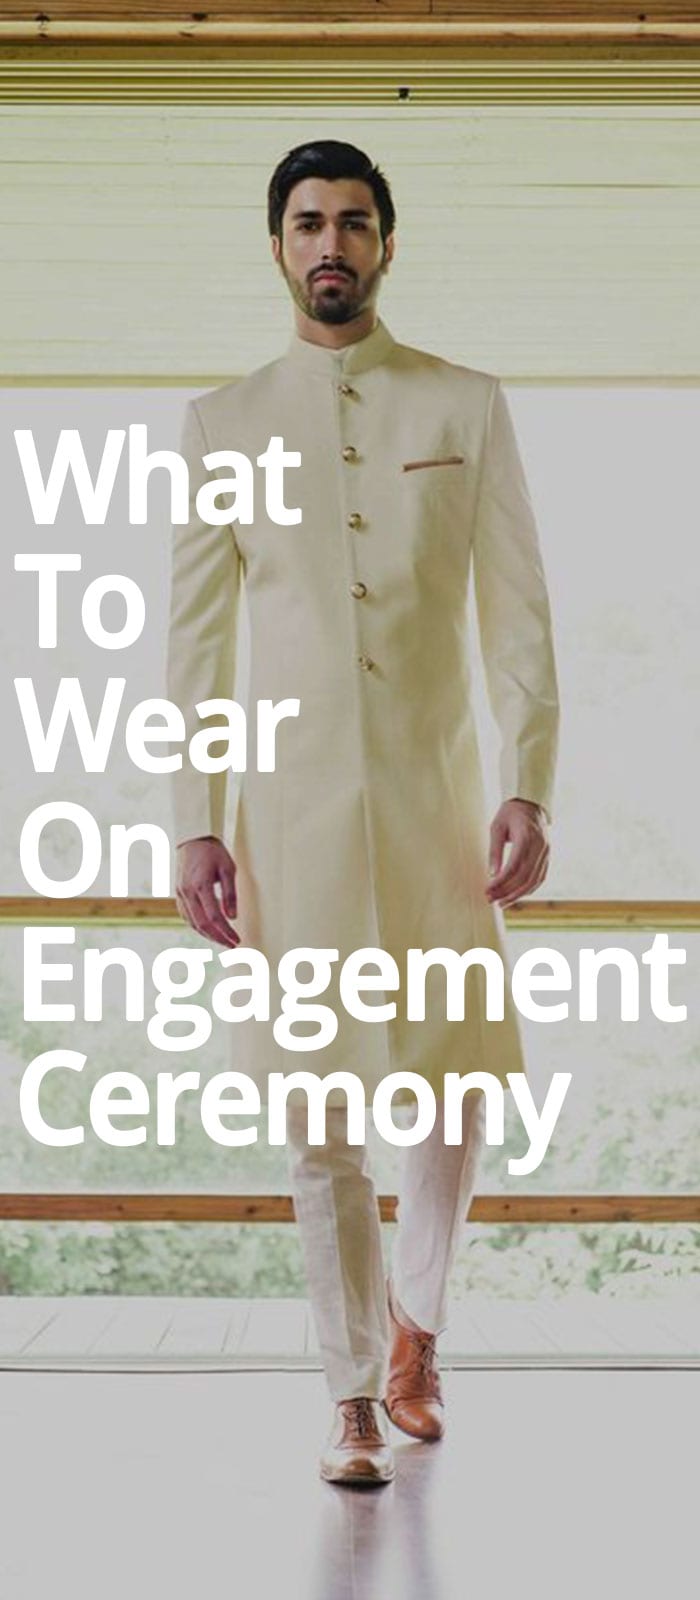 What To Wear On Engagement Ceremony